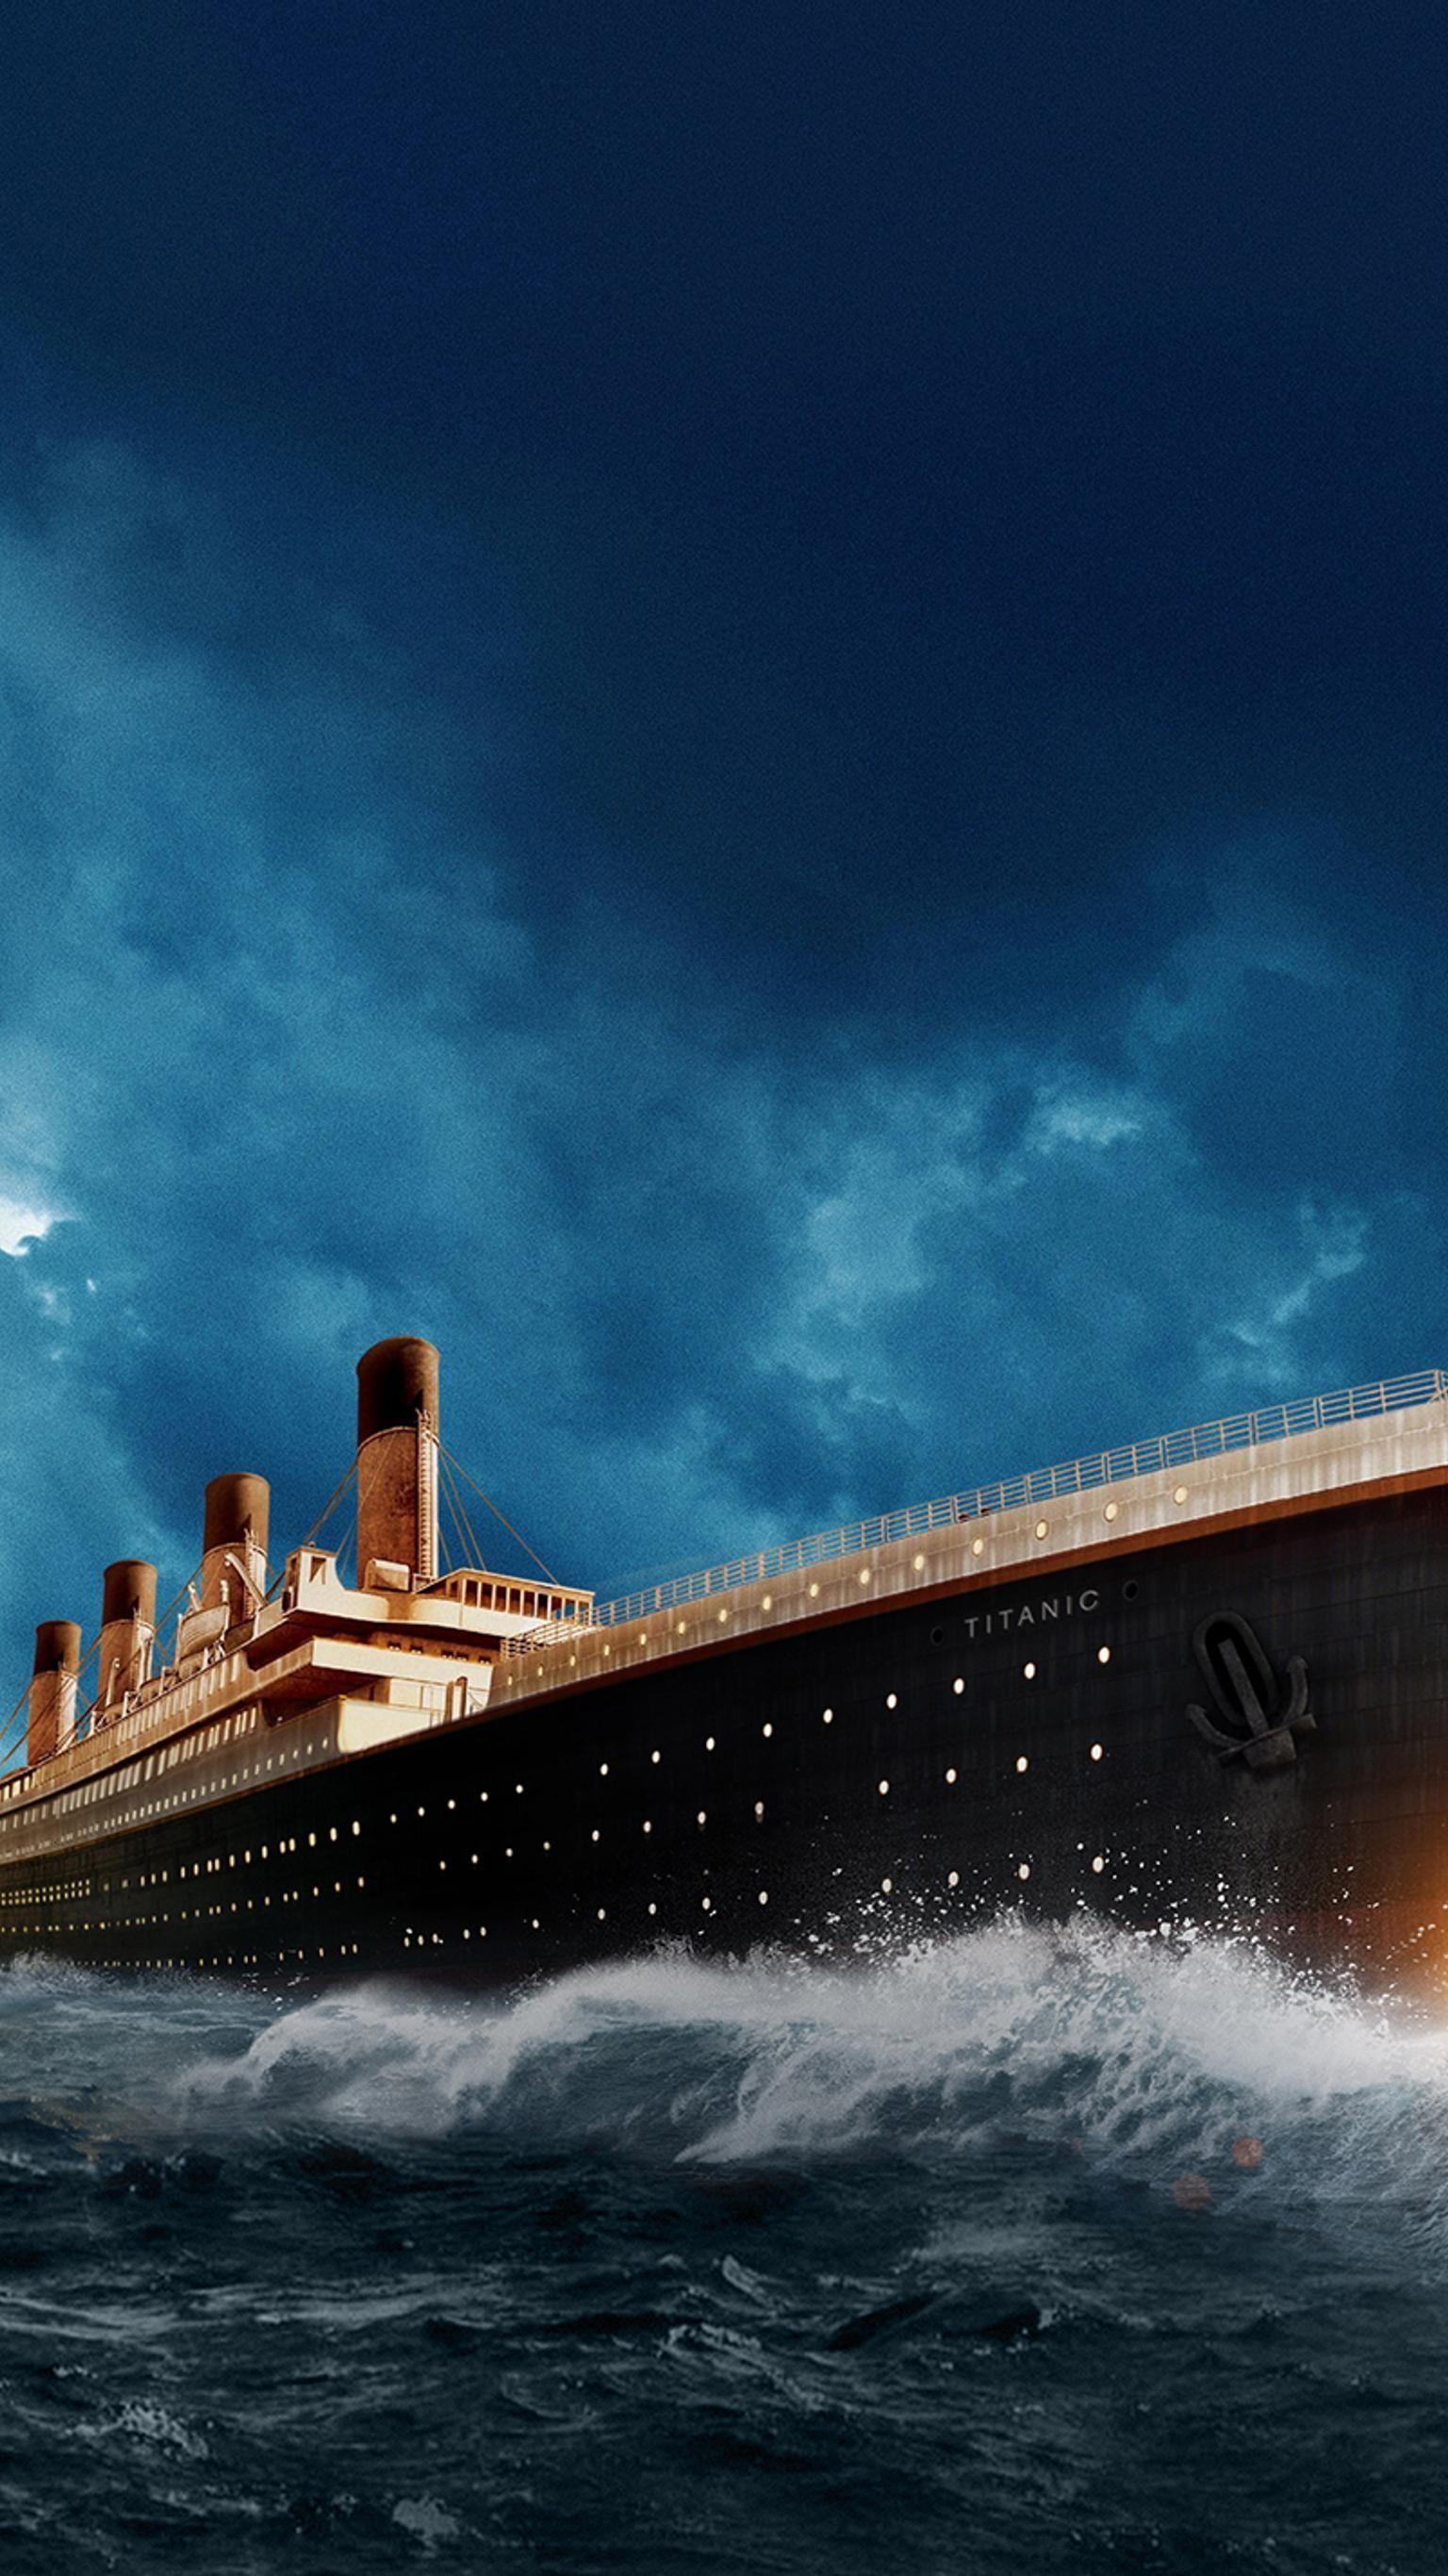 Titanic download the new version for iphone